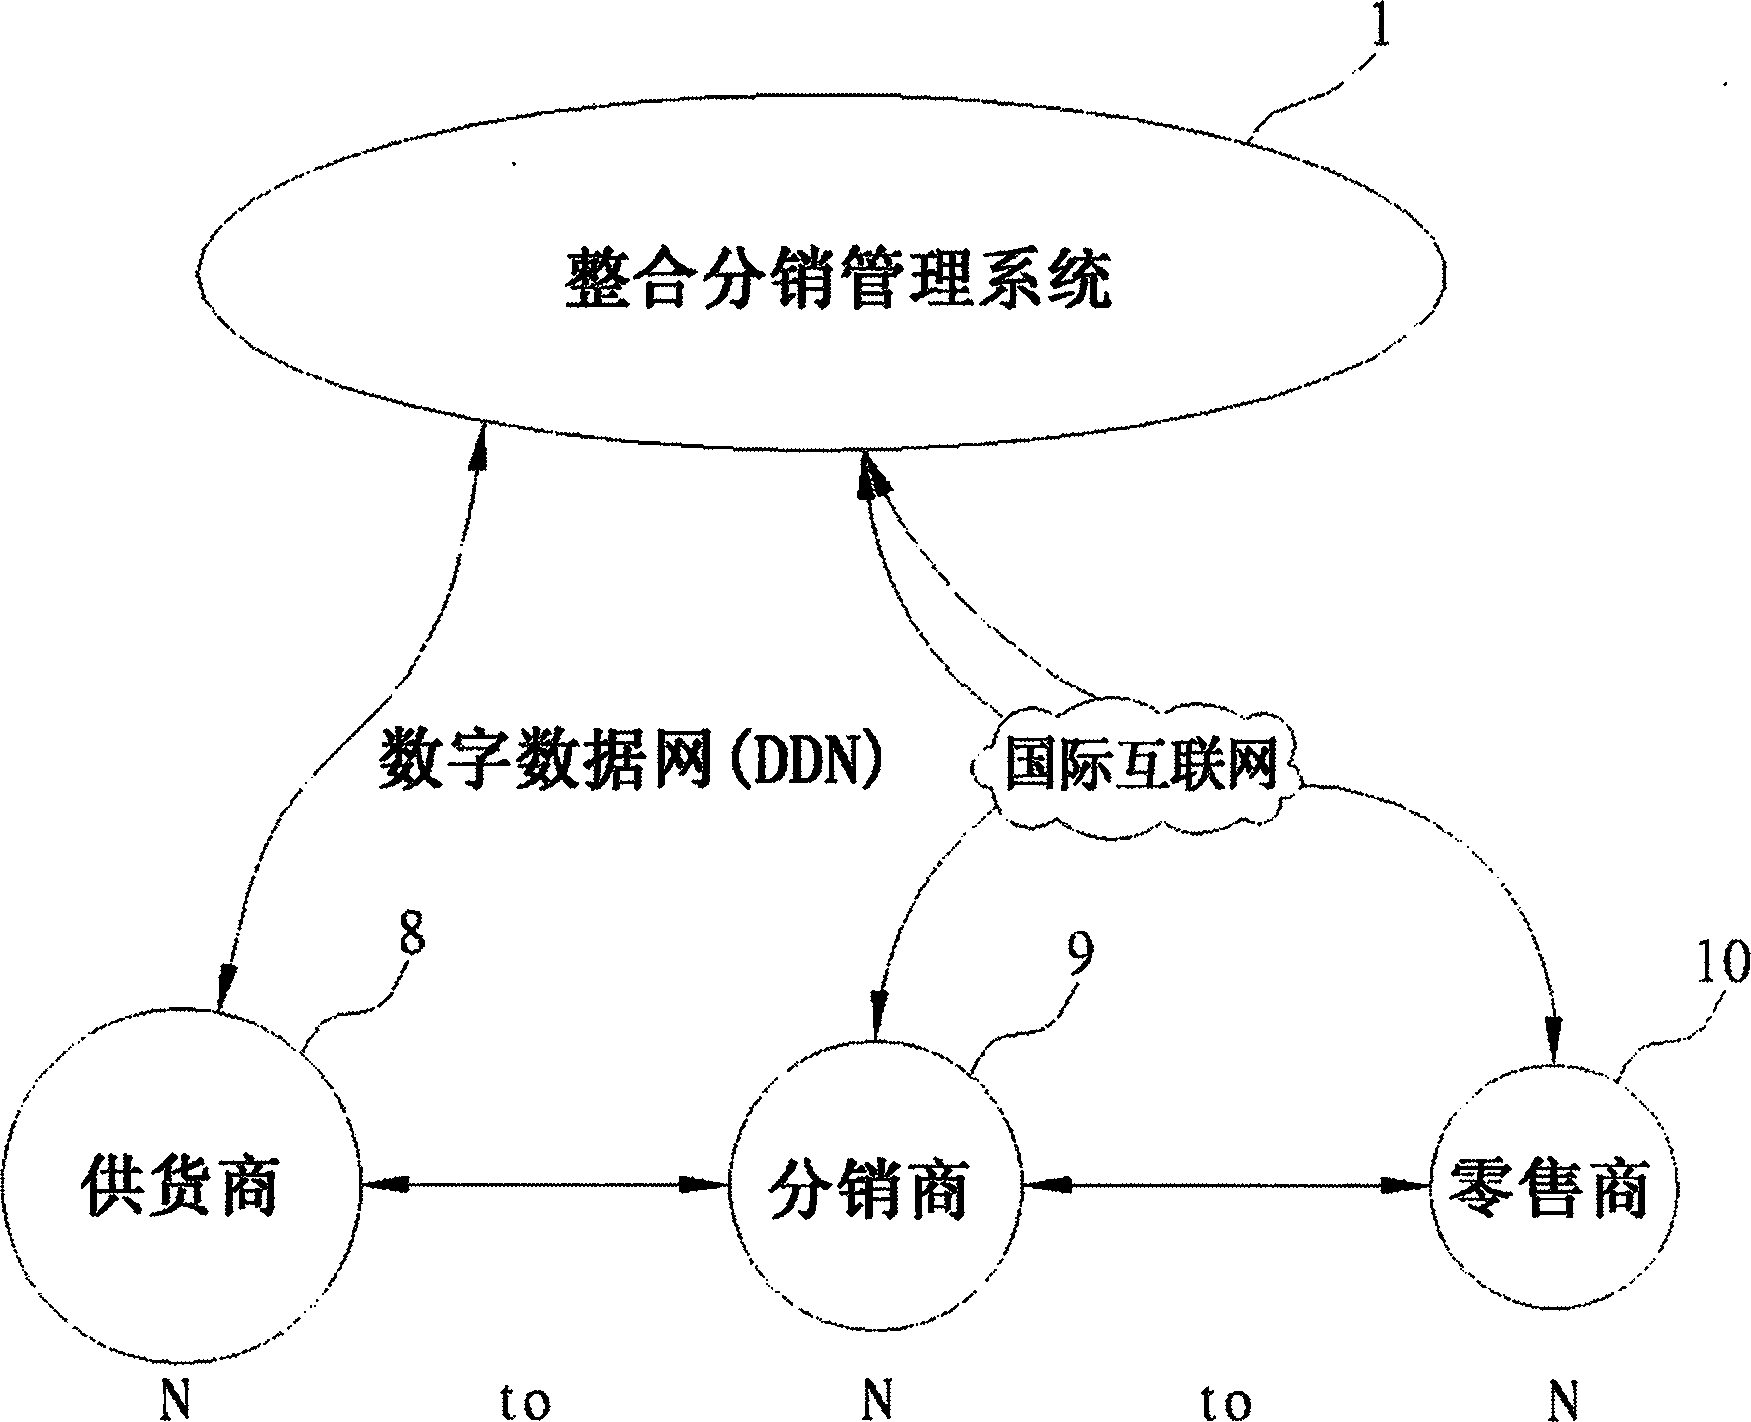 Integrated system and method of distribution and management